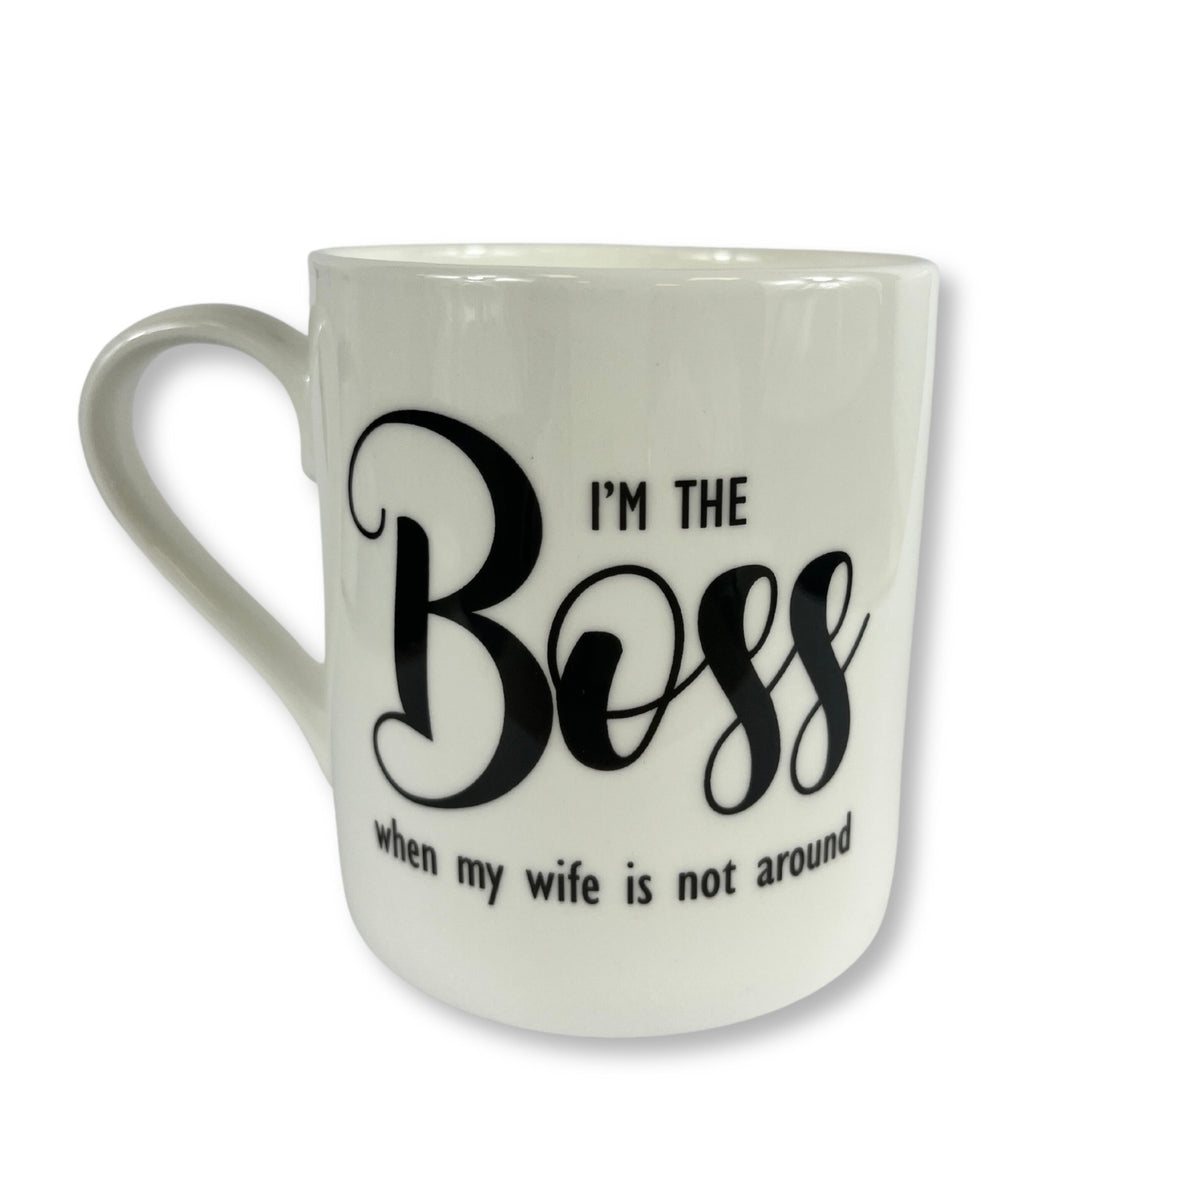 I'm the Boss when my wife is not here Mug